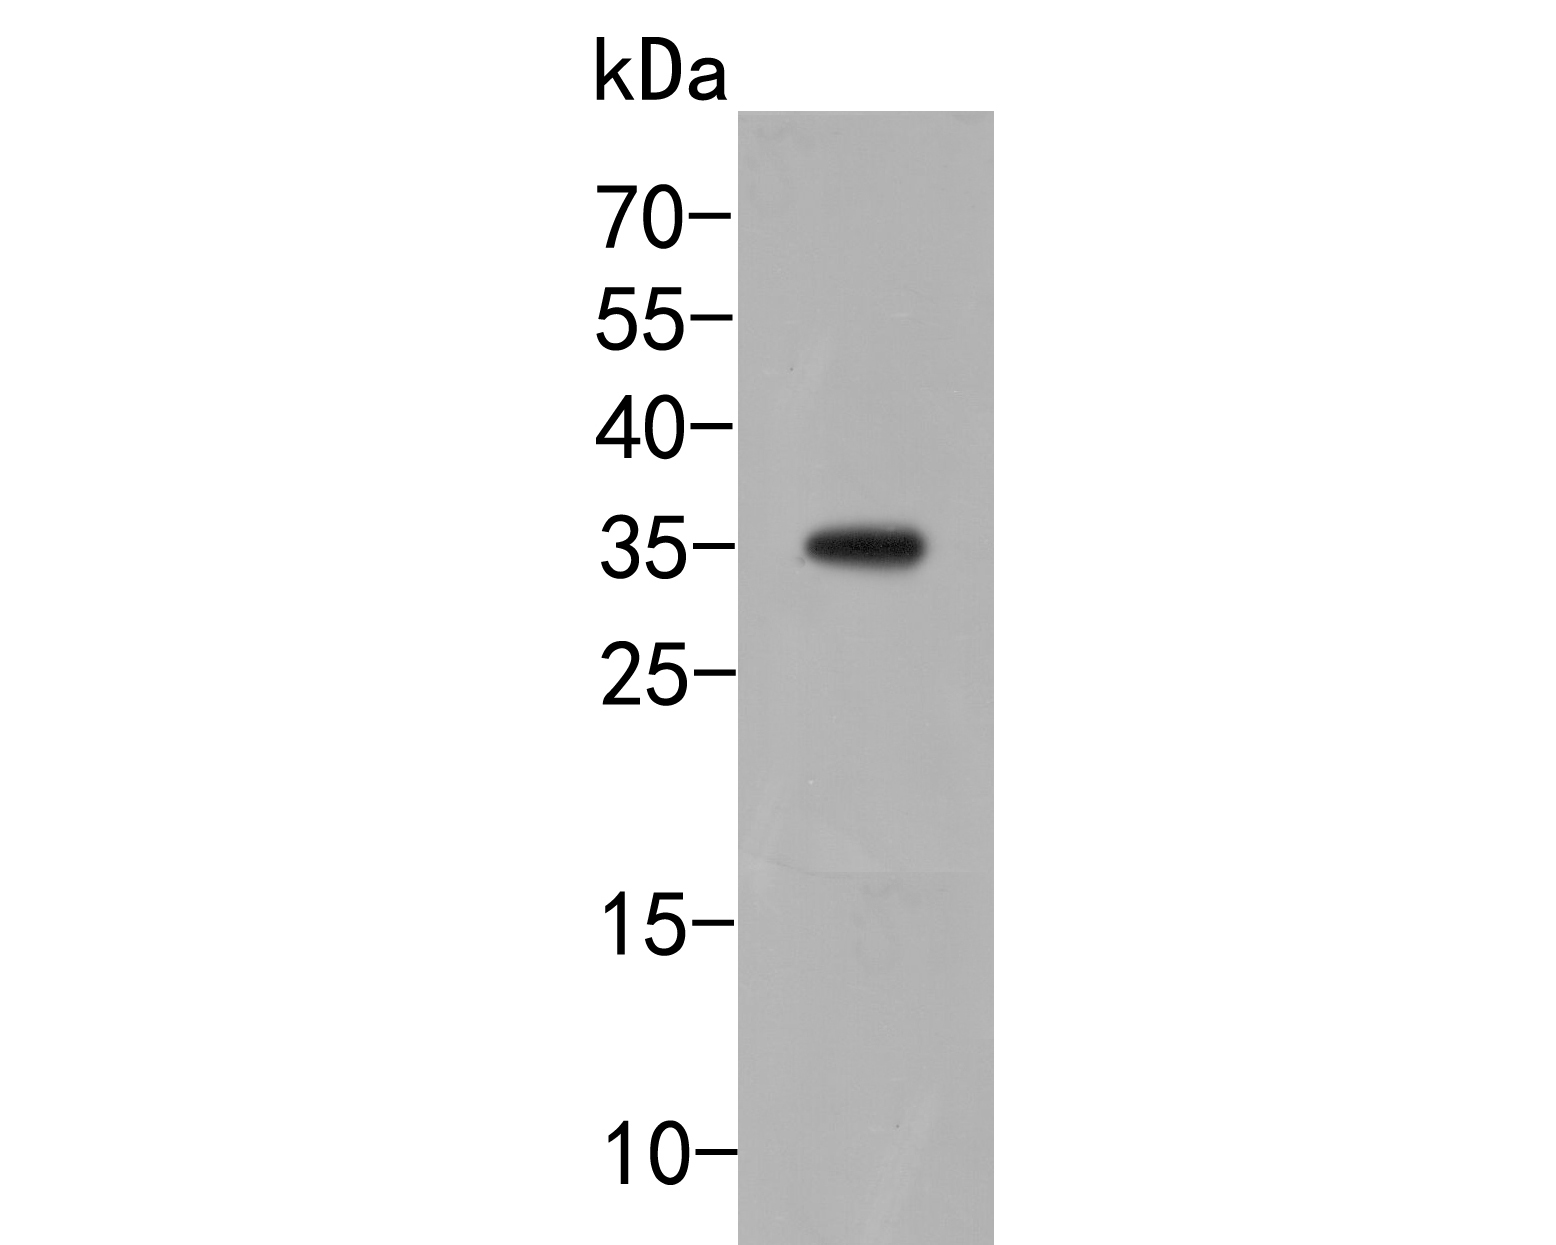 Fig1:; Western blot analysis of TMEM119 on SHSY5Y cell lysate. Proteins were transferred to a PVDF membrane and blocked with 5% BSA in PBS for 1 hour at room temperature. The primary antibody ( 1/500) was used in 5% BSA at room temperature for 2 hours. Goat Anti-Rabbit IgG - HRP Secondary Antibody (HA1001) at 1:5,000 dilution was used for 1 hour at room temperature.